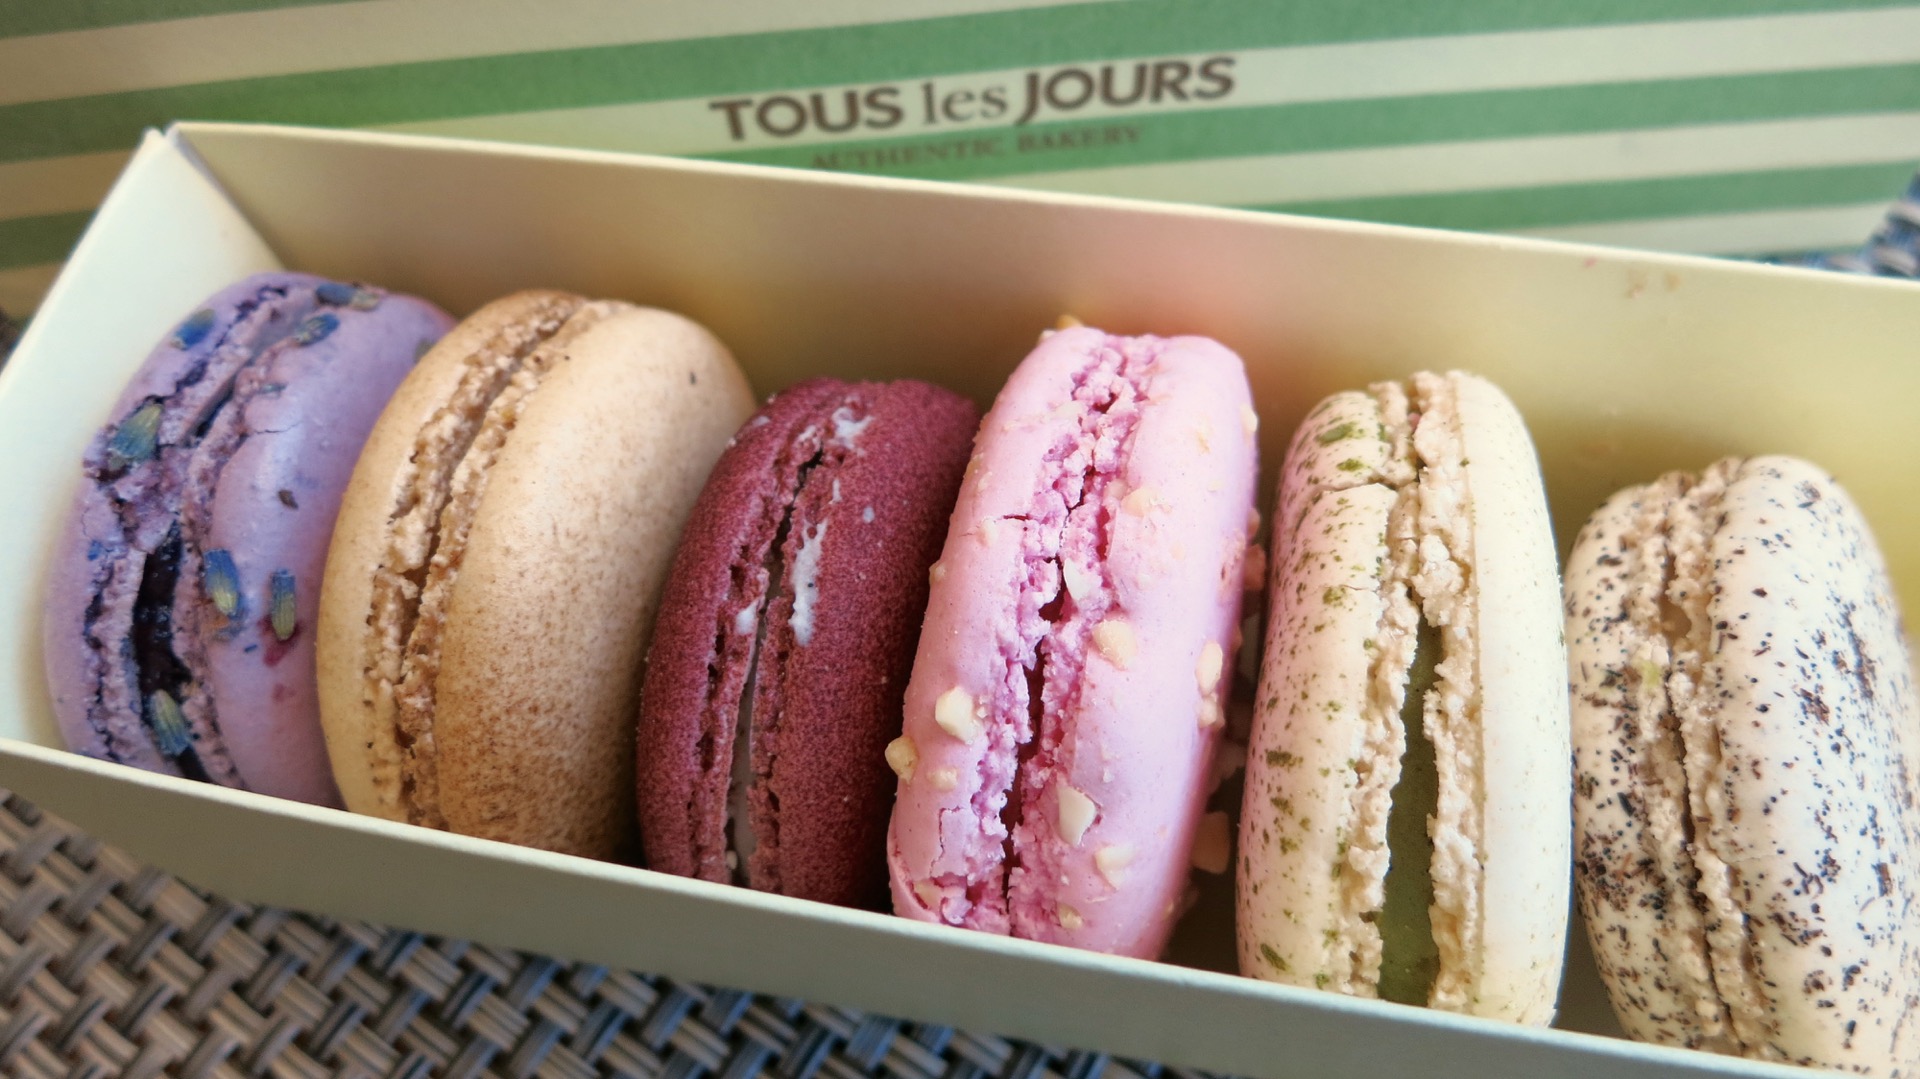 It's hard to top the sheer number of flavors available at Tous Les Jours.